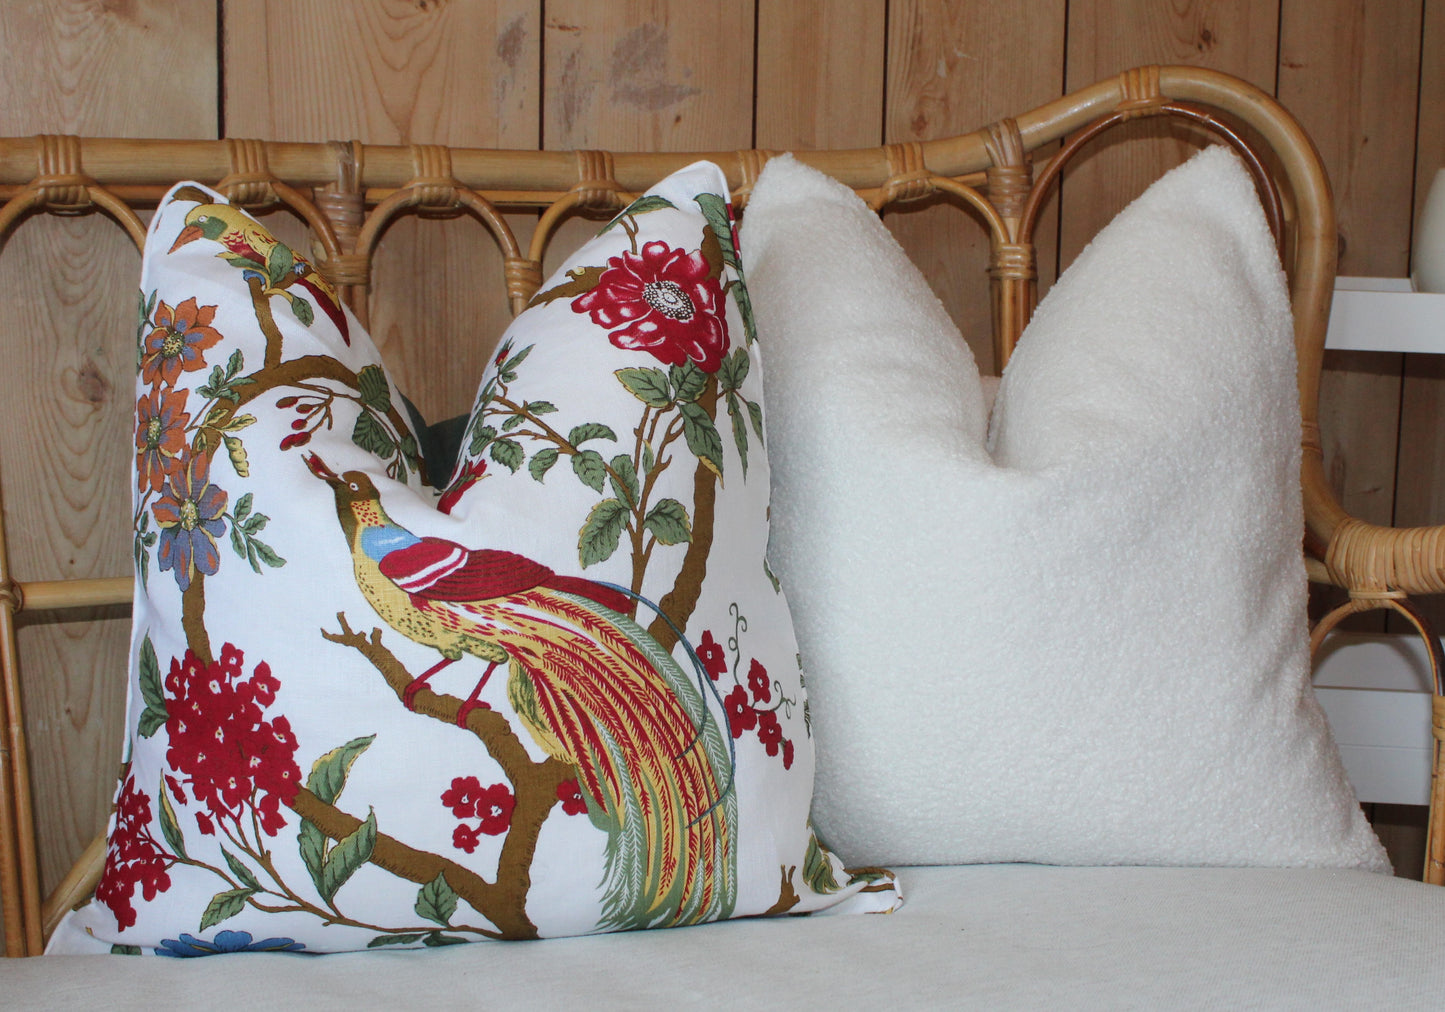 Large Bird featured cushion covers